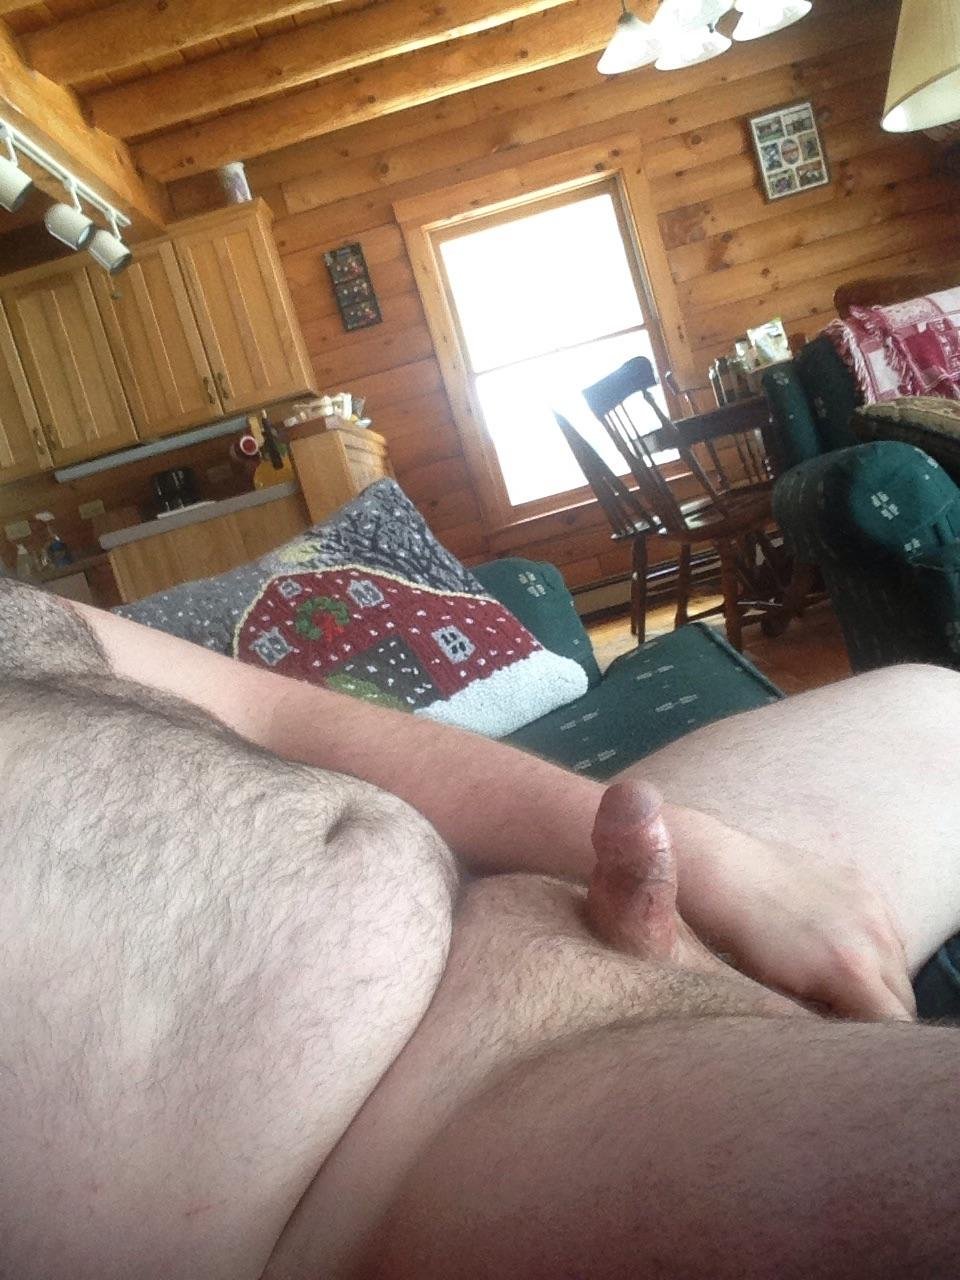 Alone at my cabin and decided to have some fun:)